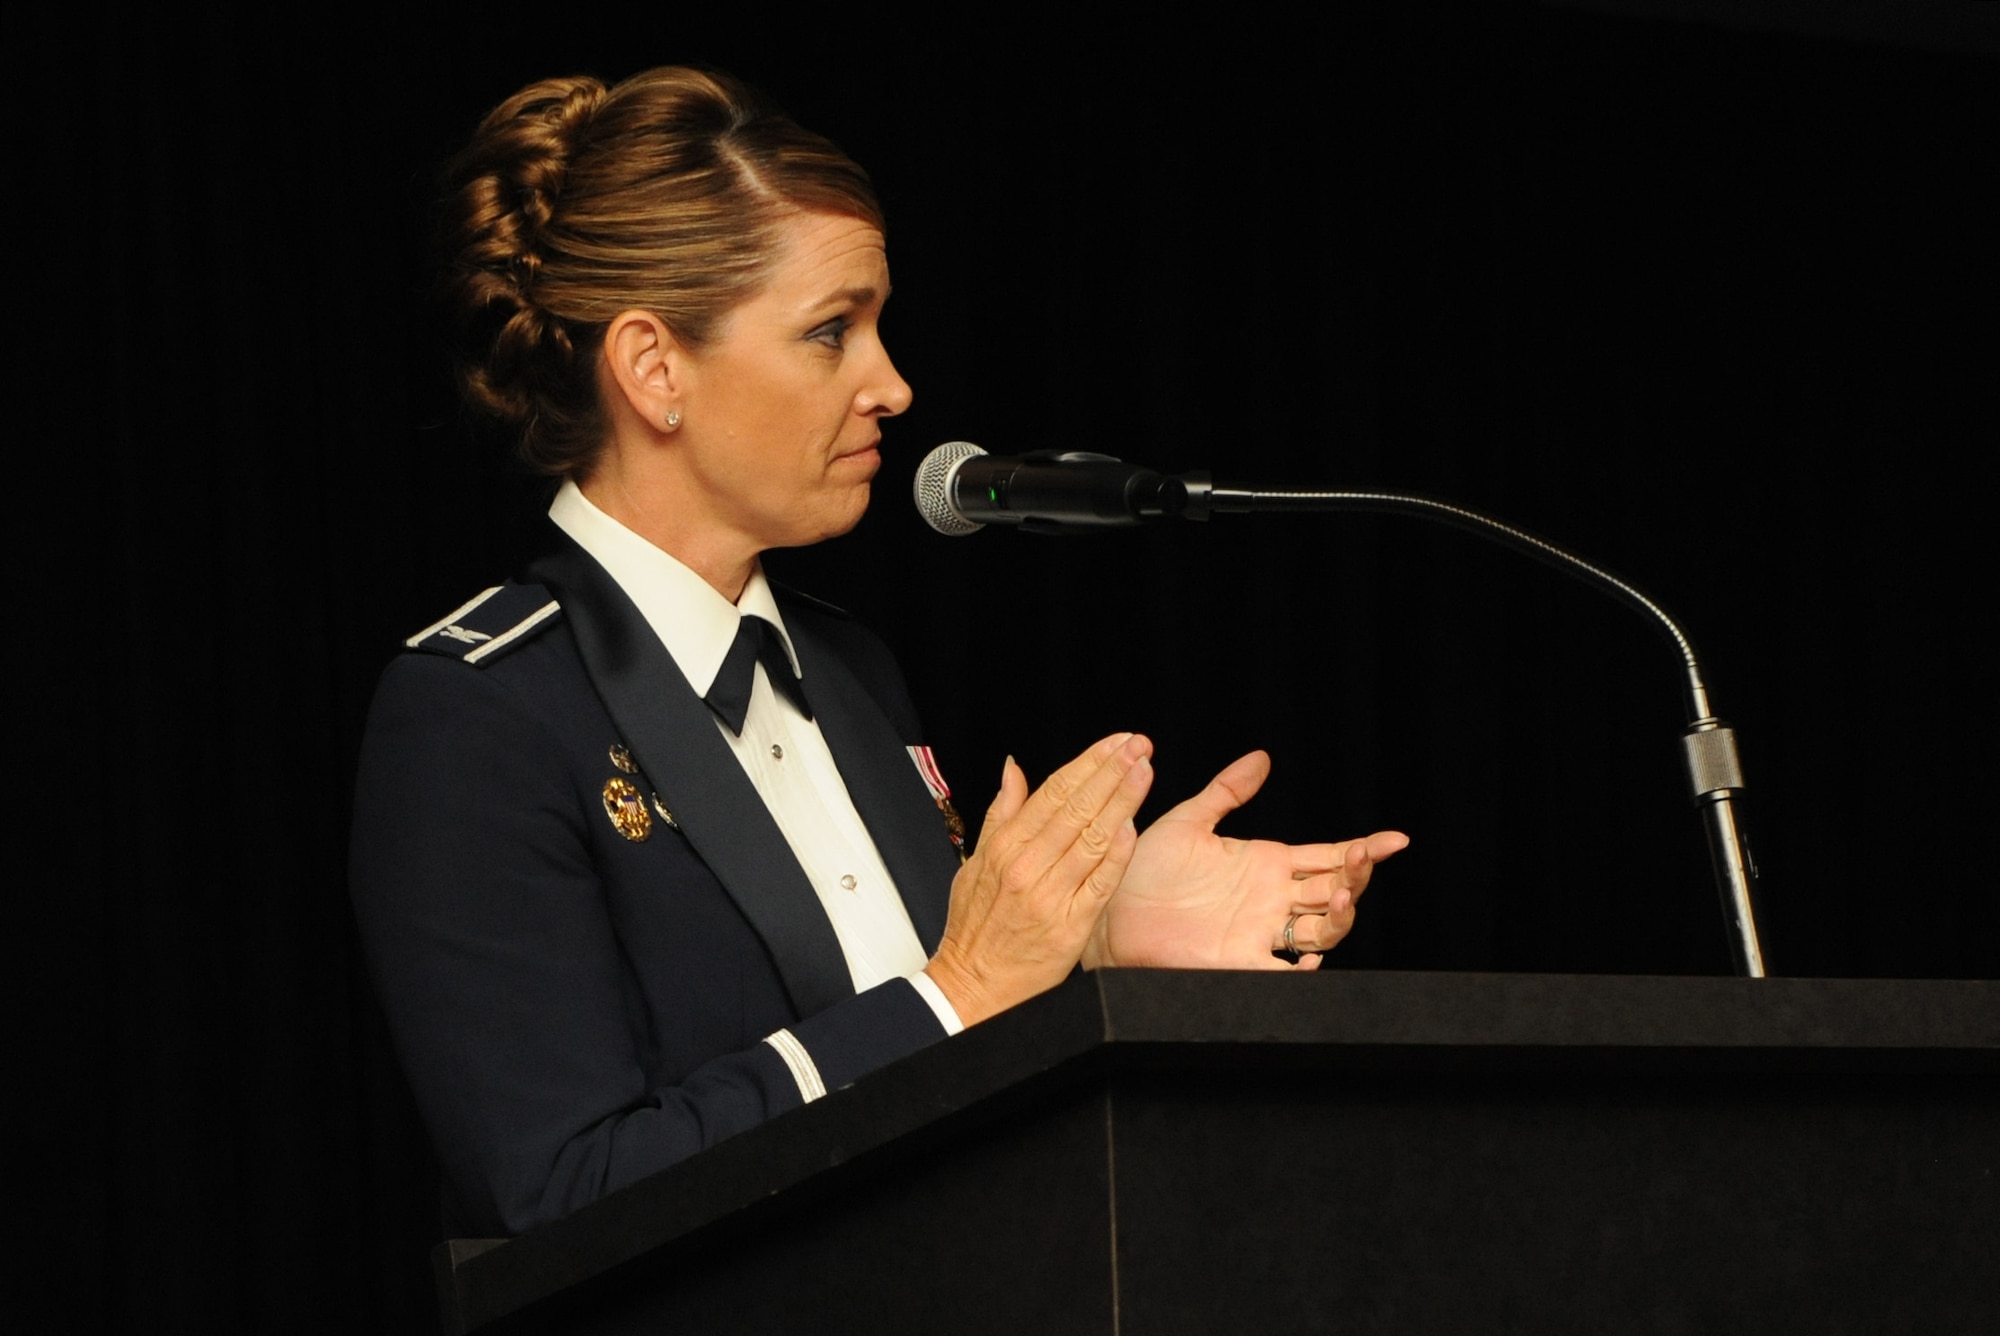 Col. Michele Edmondson, 81st Training Wing commander, delivers closing remarks during the Keesler Air Force Ball at the Imperial Palace Casino Sept. 24, 2016, Biloxi, Miss. The event was sponsored by the Air Force Association John C. Stennis Chapter #332 to celebrate the Air Force’s 69th birthday and the base’s 75th anniversary. (U.S. Air Force photo by Kemberly Groue/Released)